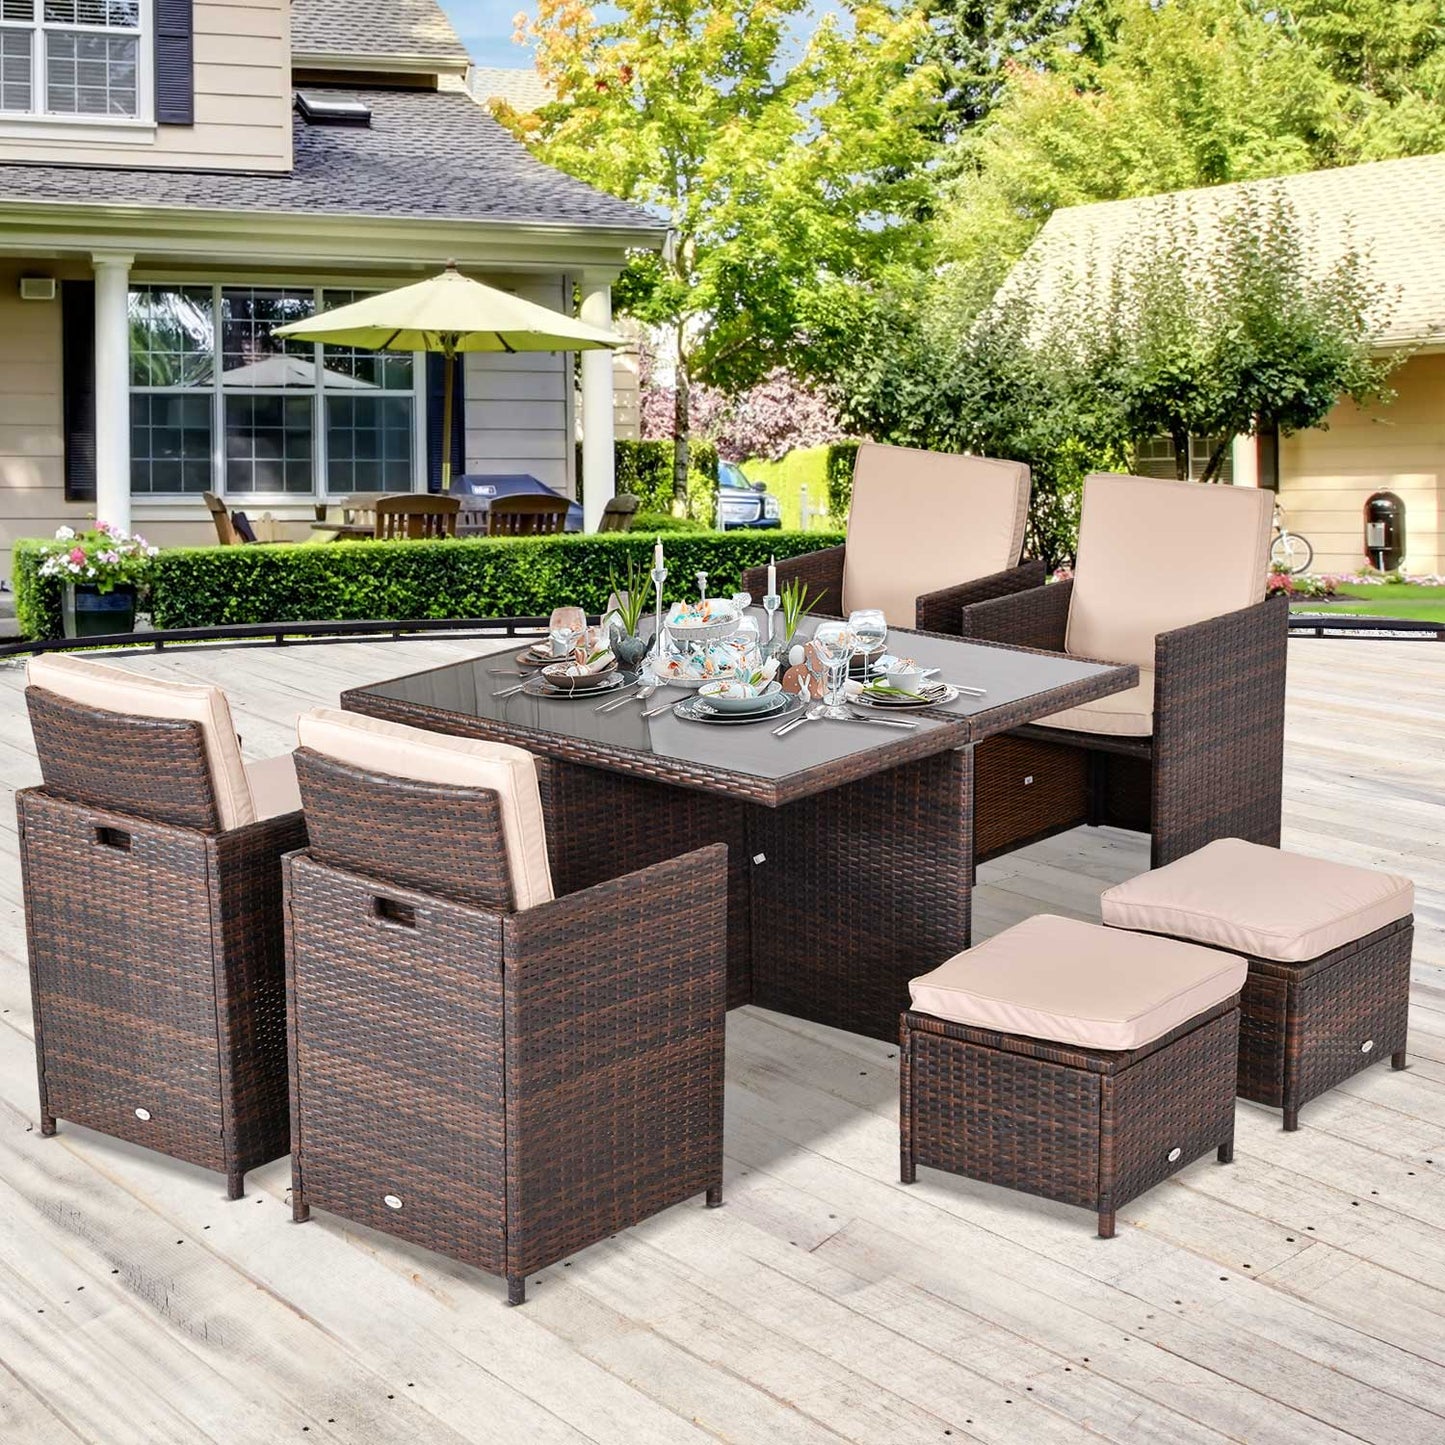 Outsunny 9PC Rattan Garden Furniture Set 8-seater Wicker Outdoor Dining Set Chairs + Footrest + Table Thick Cushion - Brown